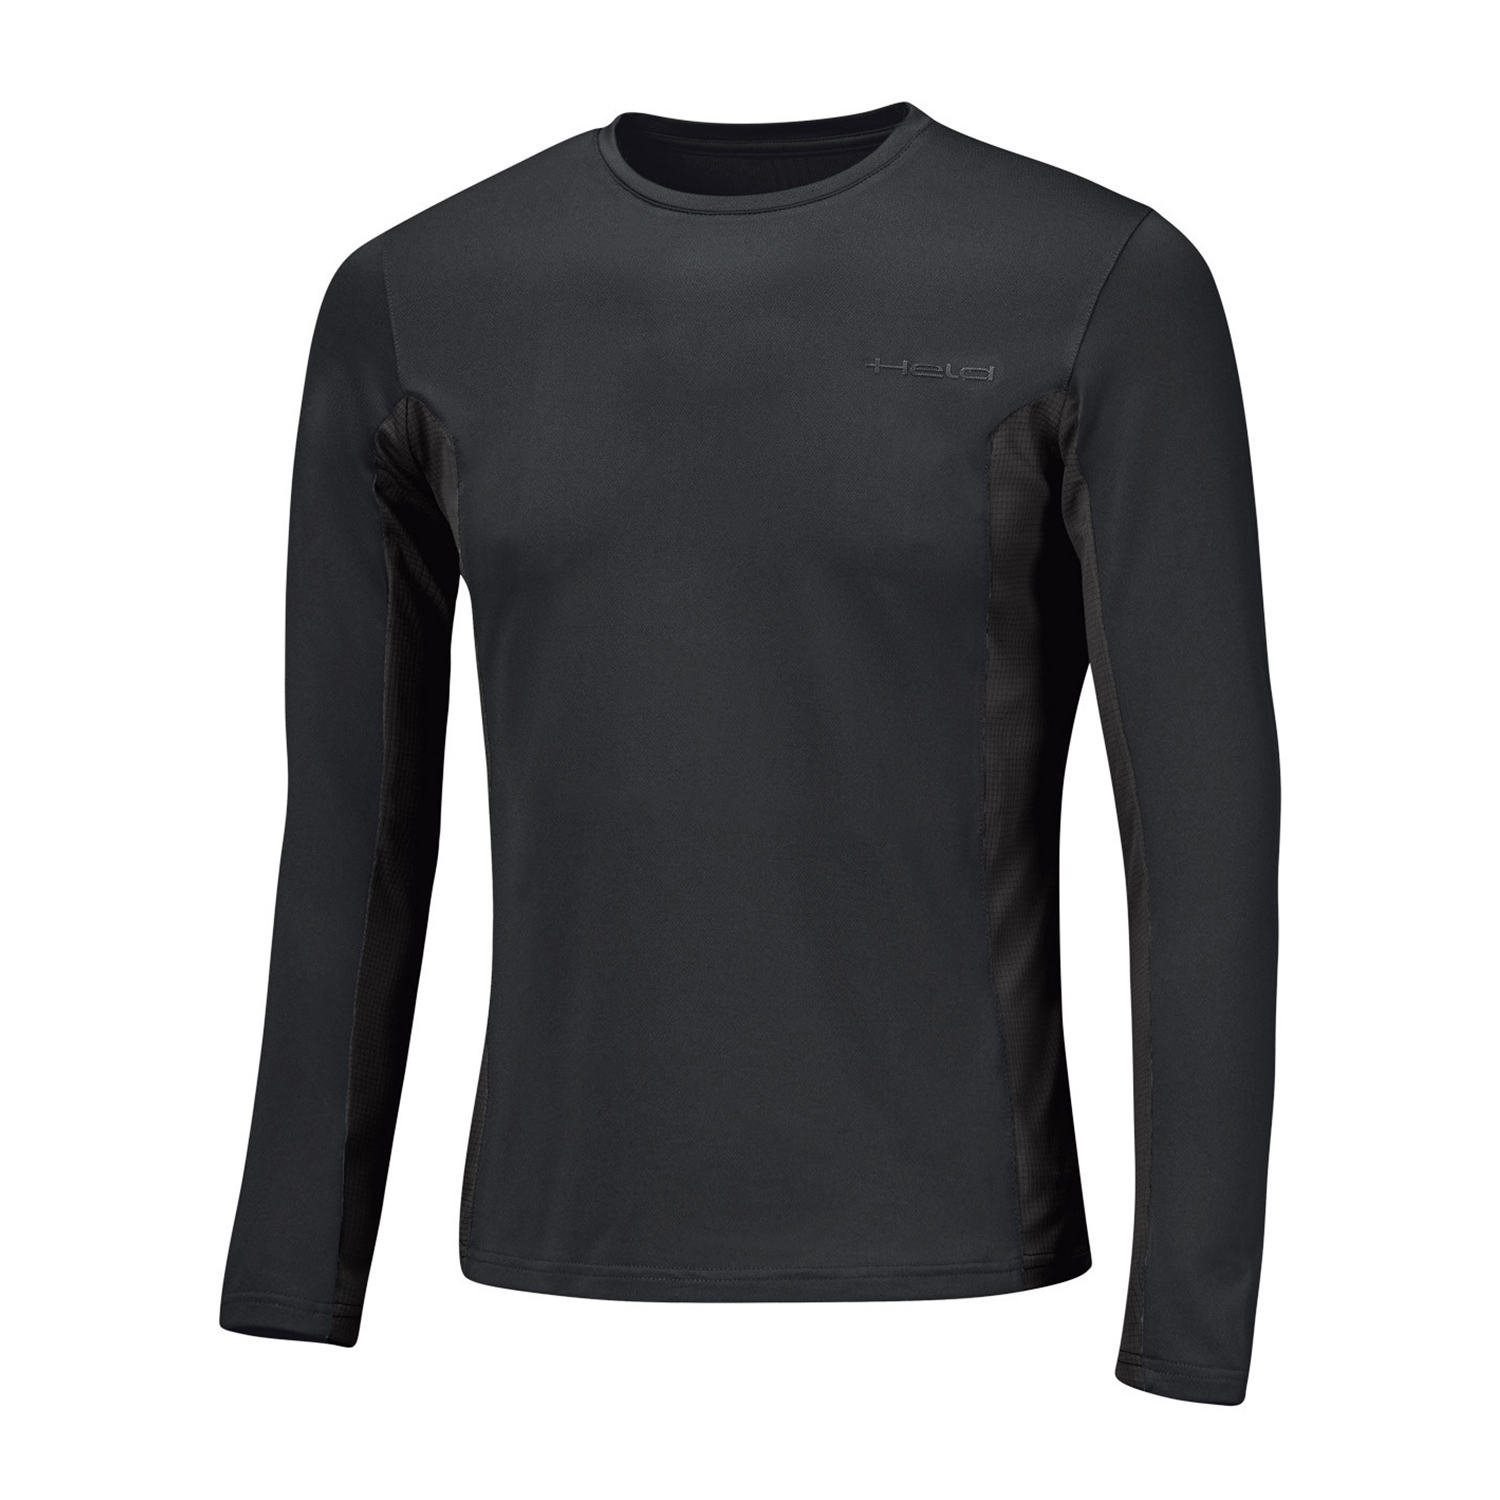 Held Cool Layer Sleeve Womens Black - Available in Various Sizes